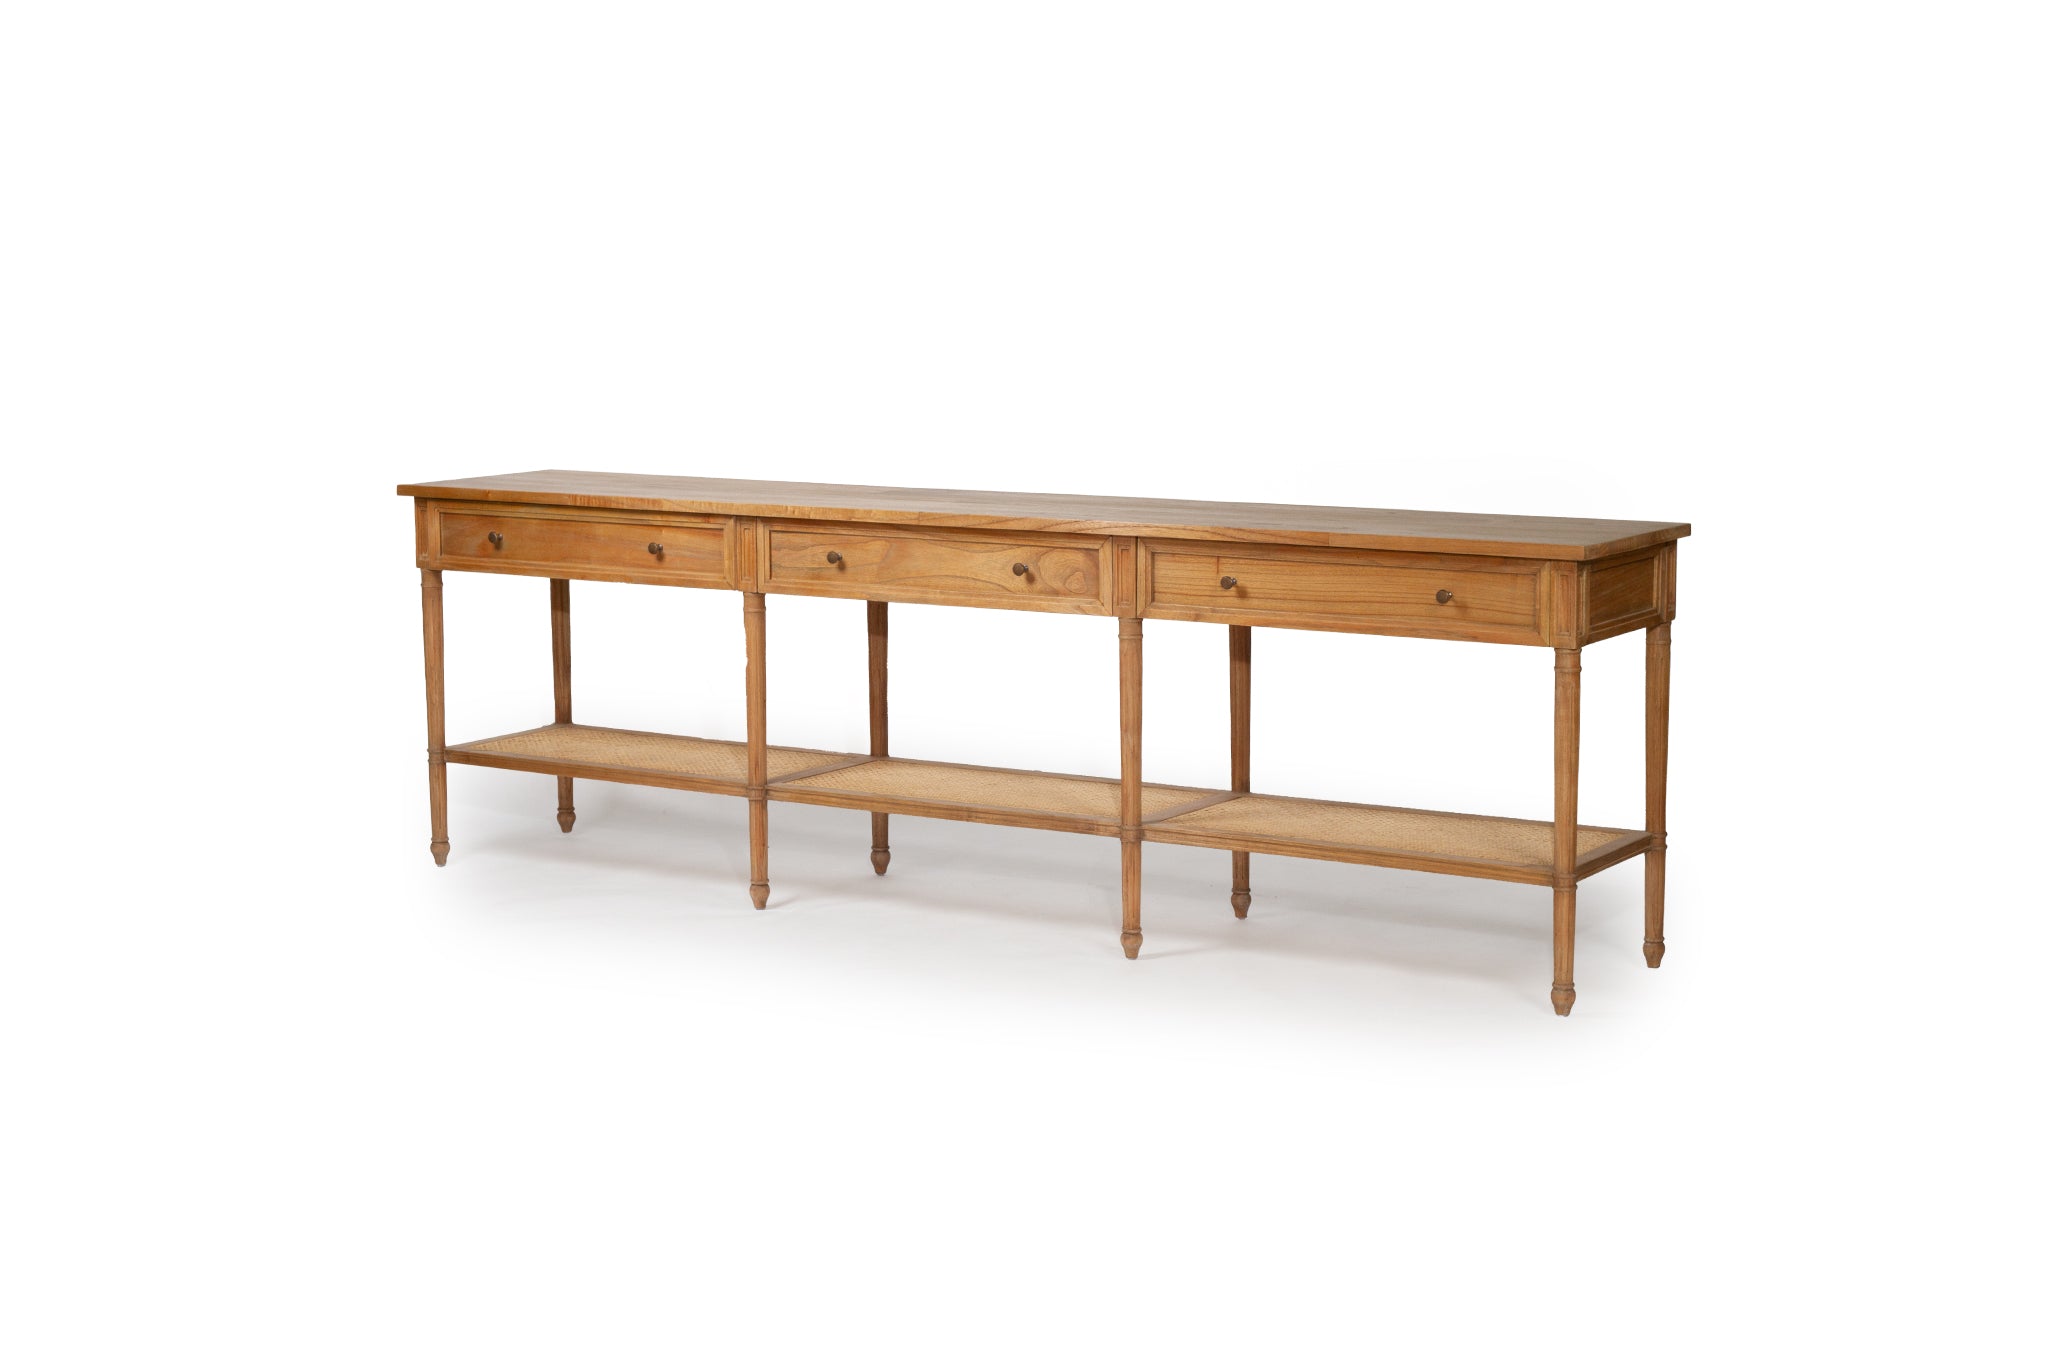 Vaucluse Mahogany & Rattan Wide Console Table – Weathered Oak – 280cm